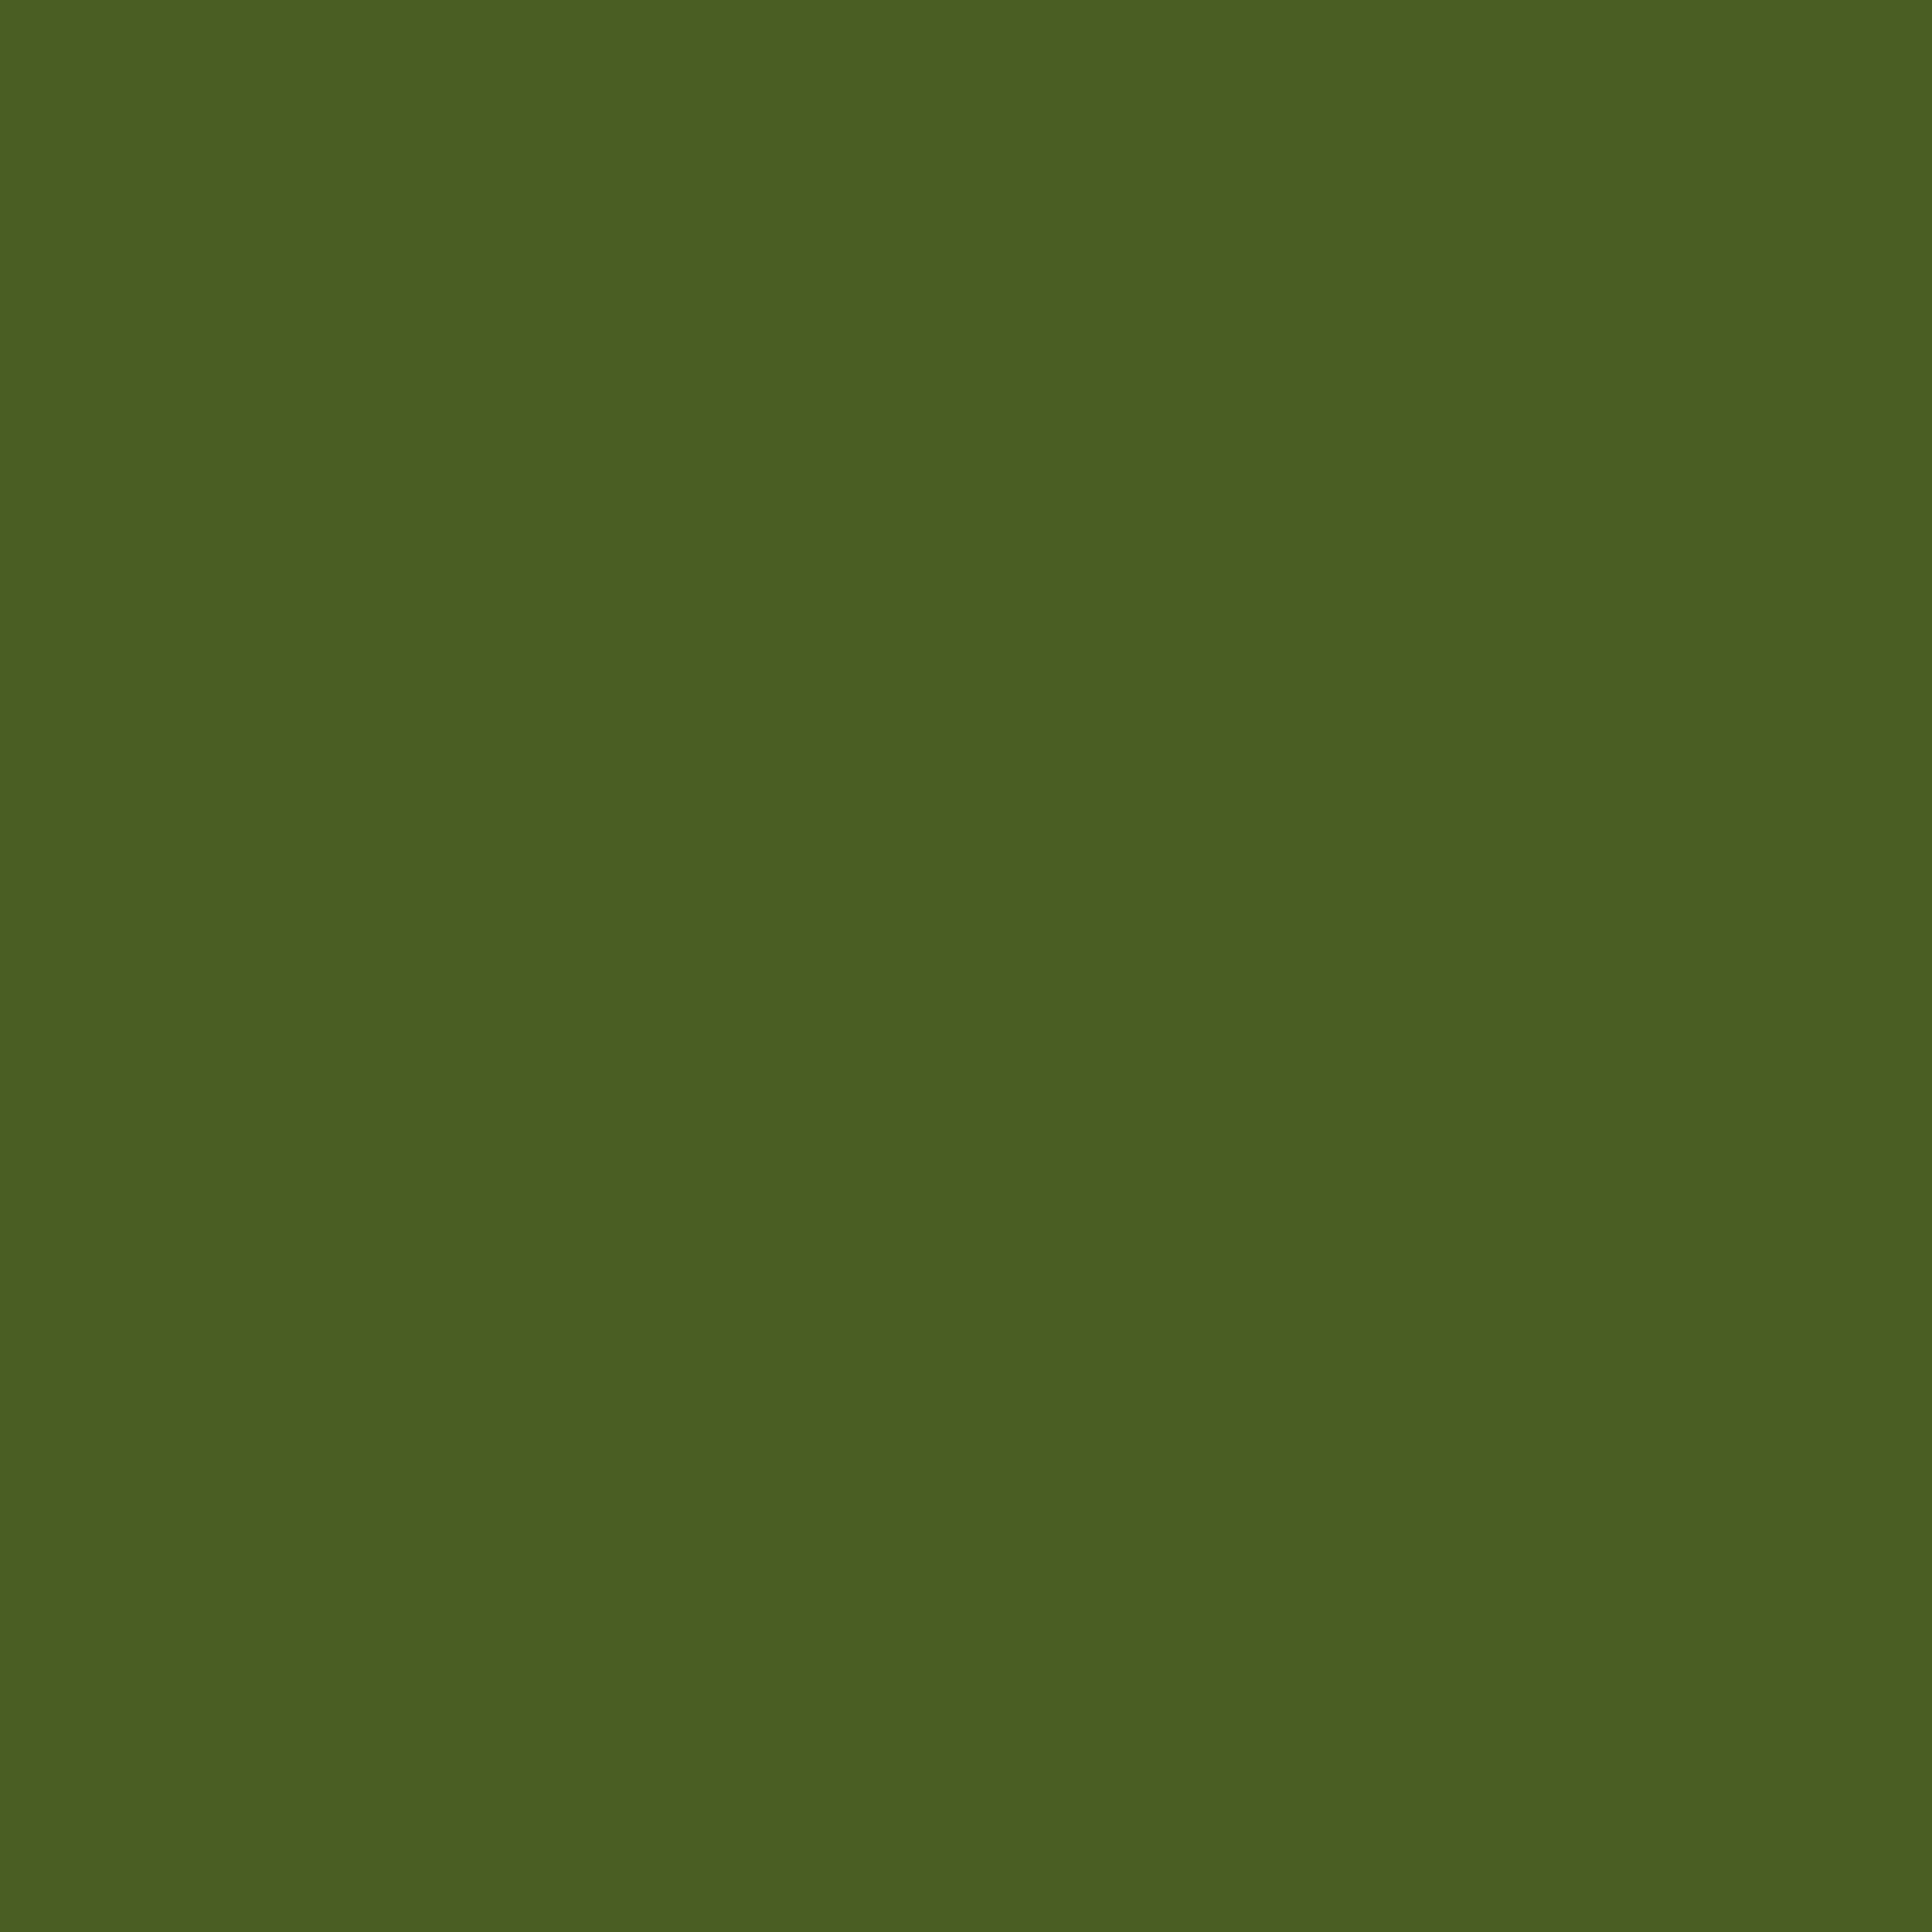 2048x2048 Dark Moss Green Solid Color Background